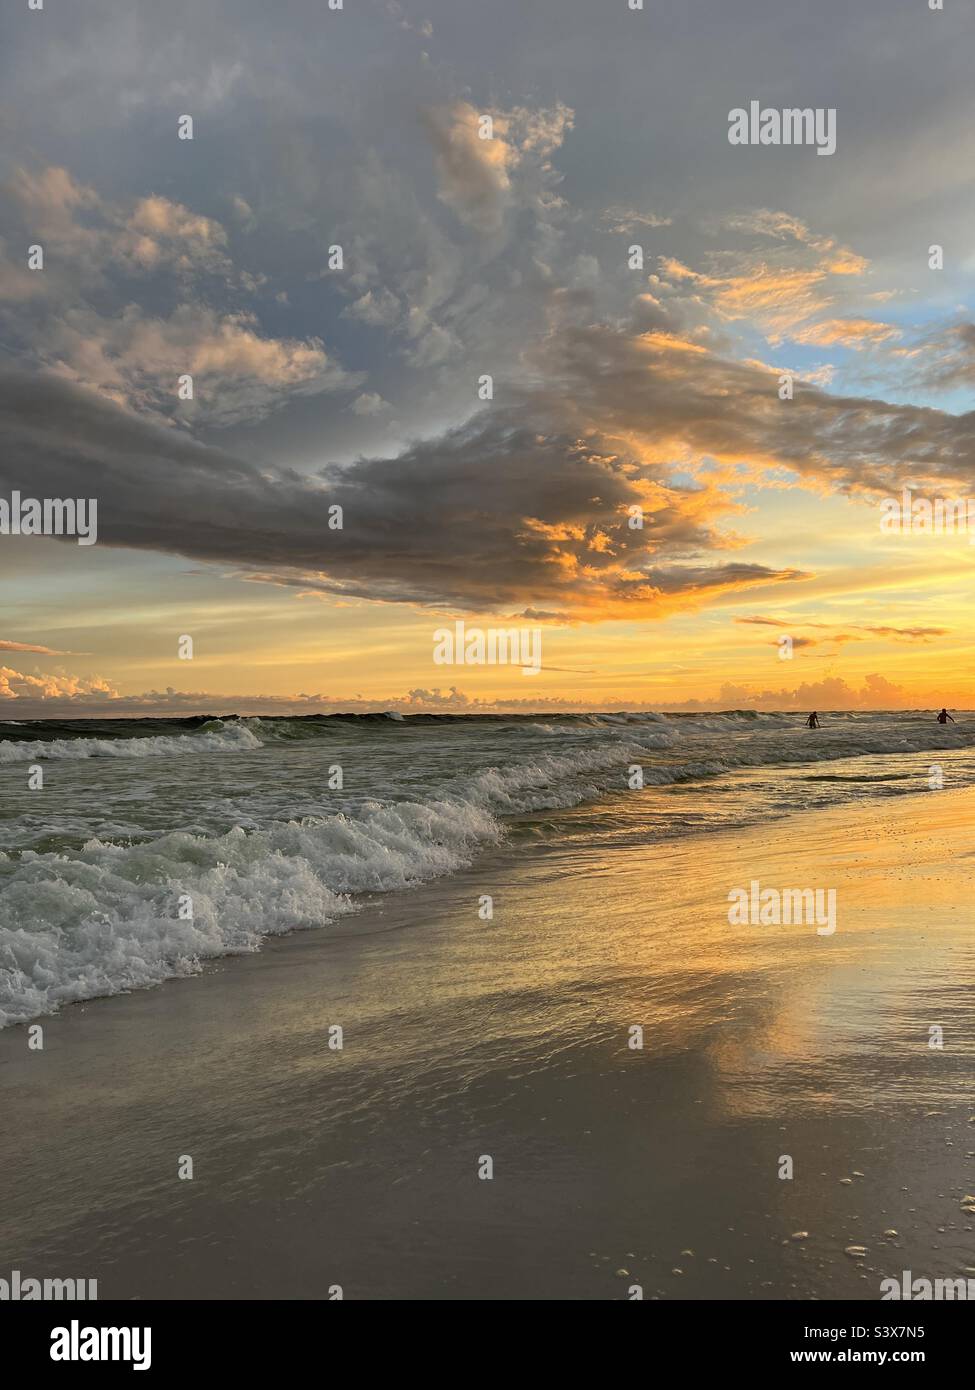 Golden Florida beach sunset with reflections on the sand Stock Photo